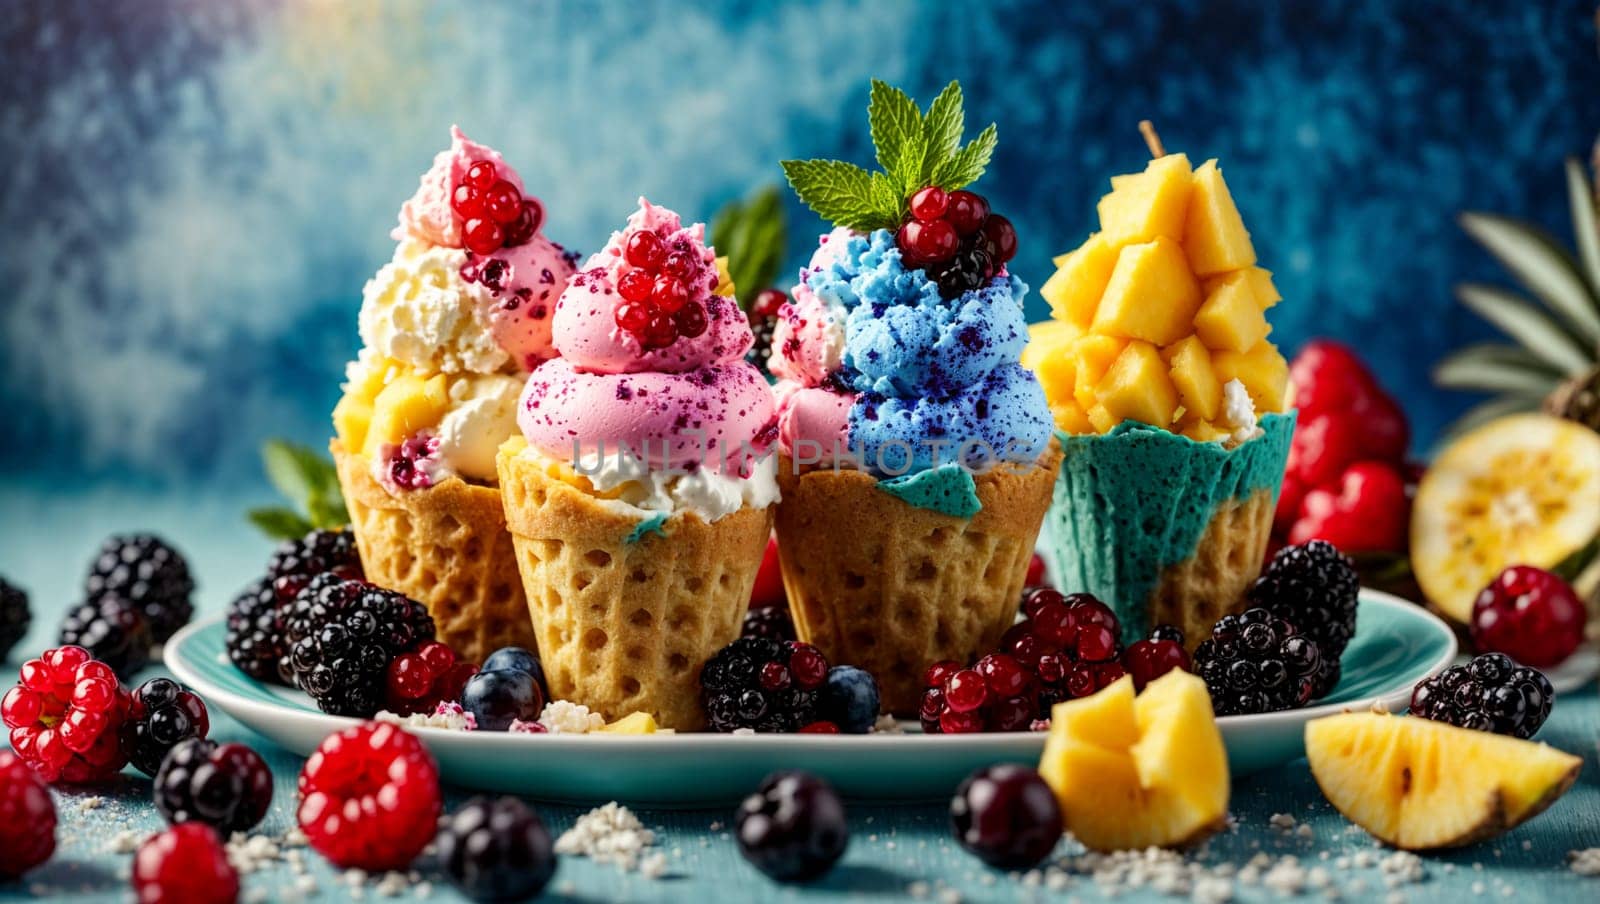 multi-colored ice cream with frozen mango, pineapple, red and black currant berries